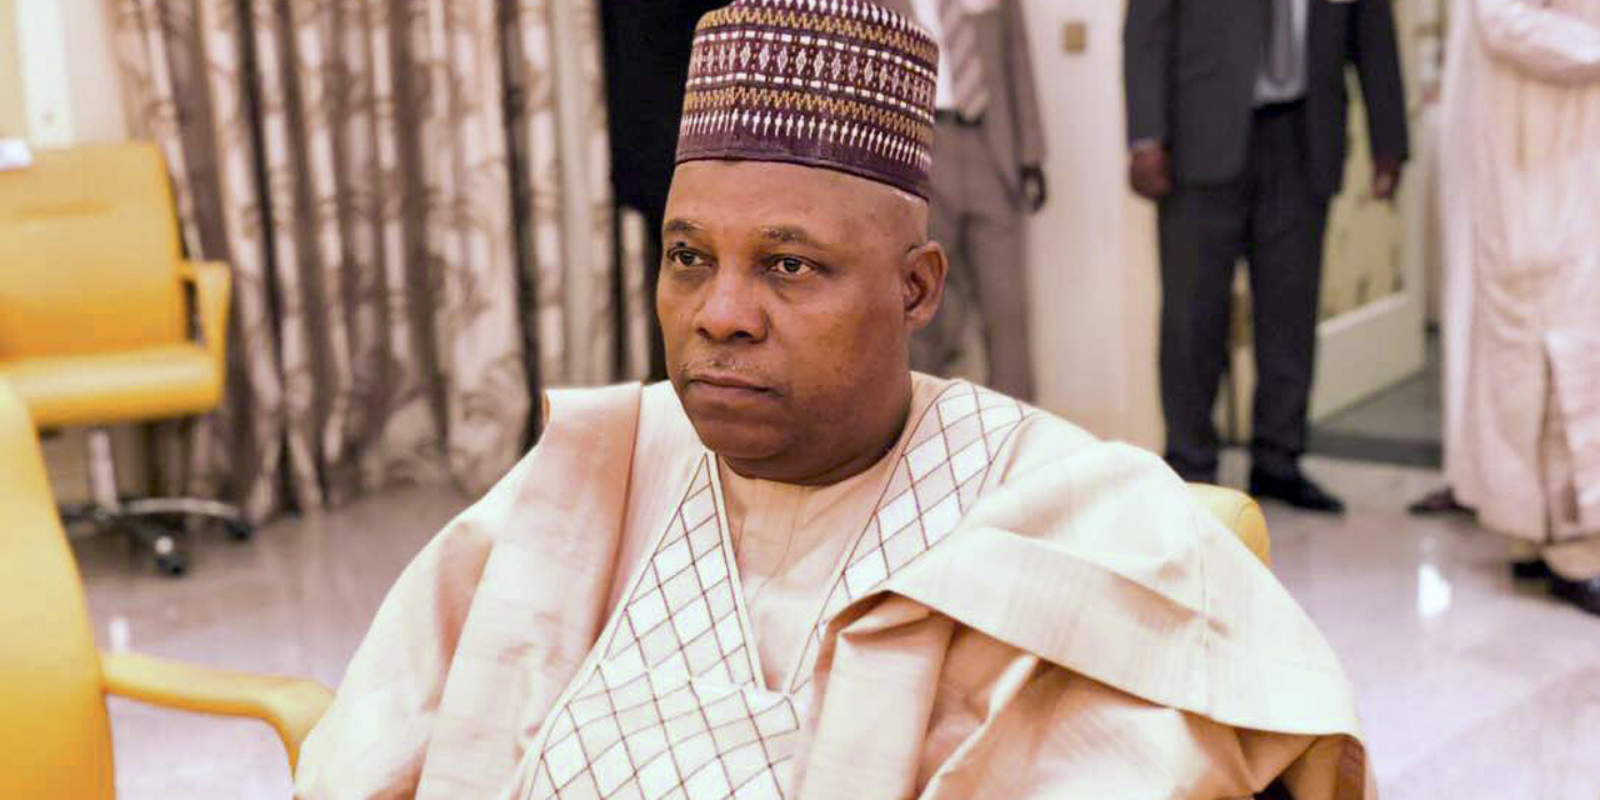 Kashim Shettima was the governor of which state?